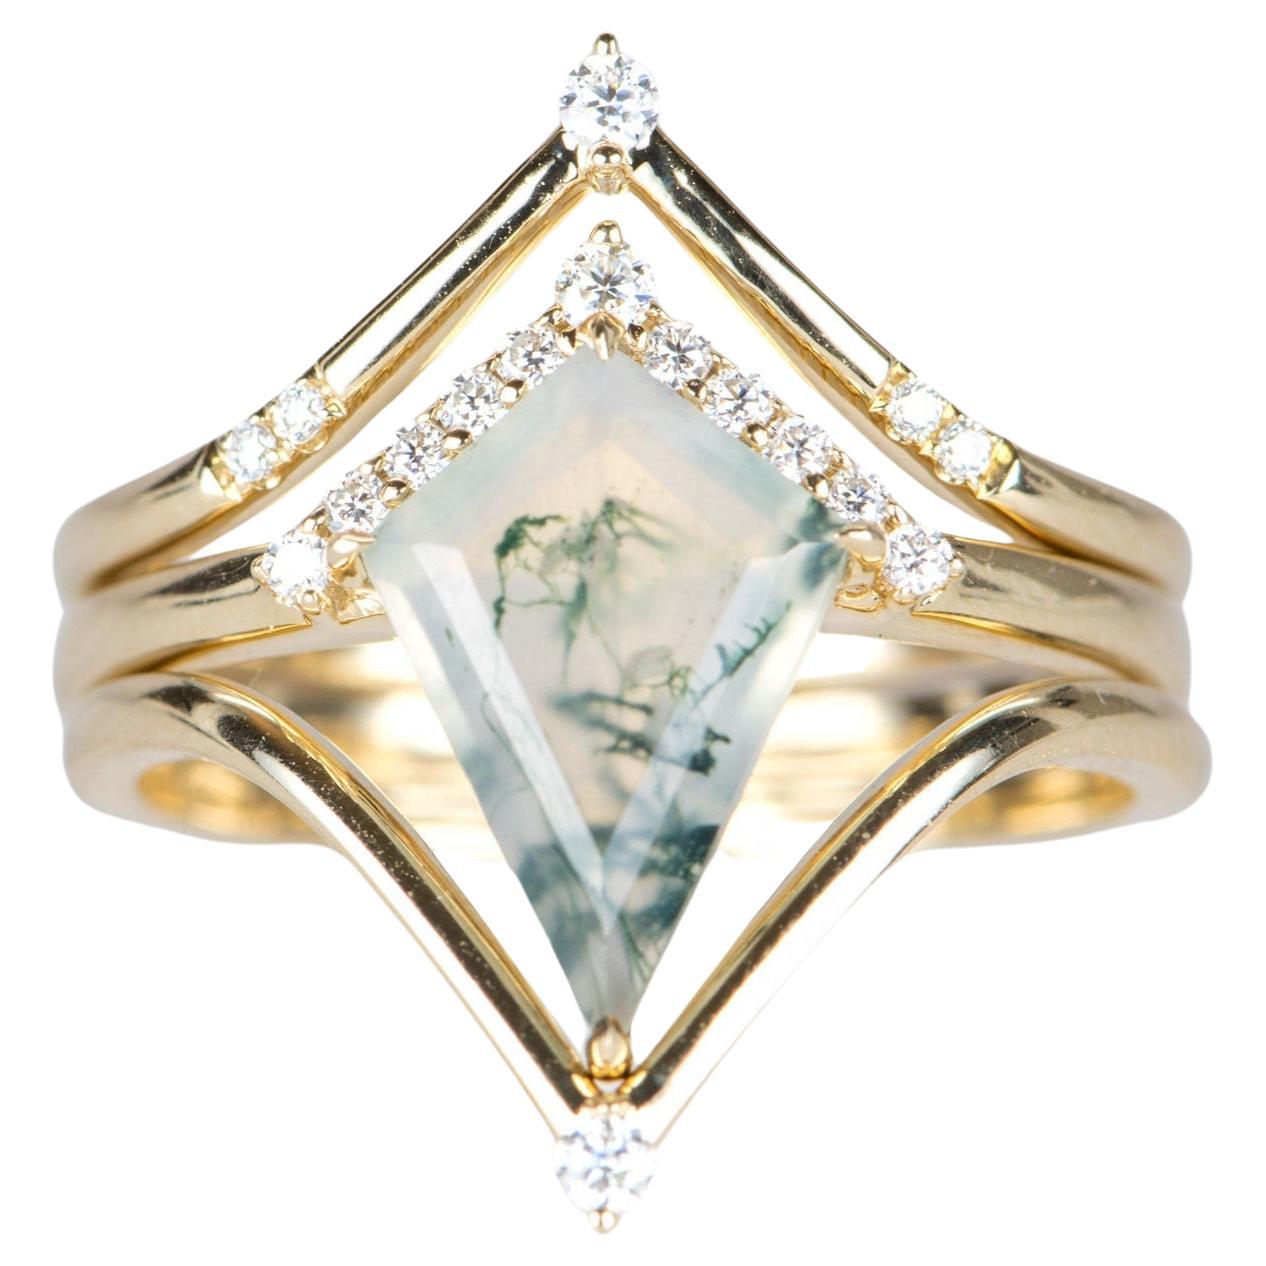 1.54ct Kite Shape Moss Agate with Wedding Bands 14K Yellow Gold Bridal Set R6332